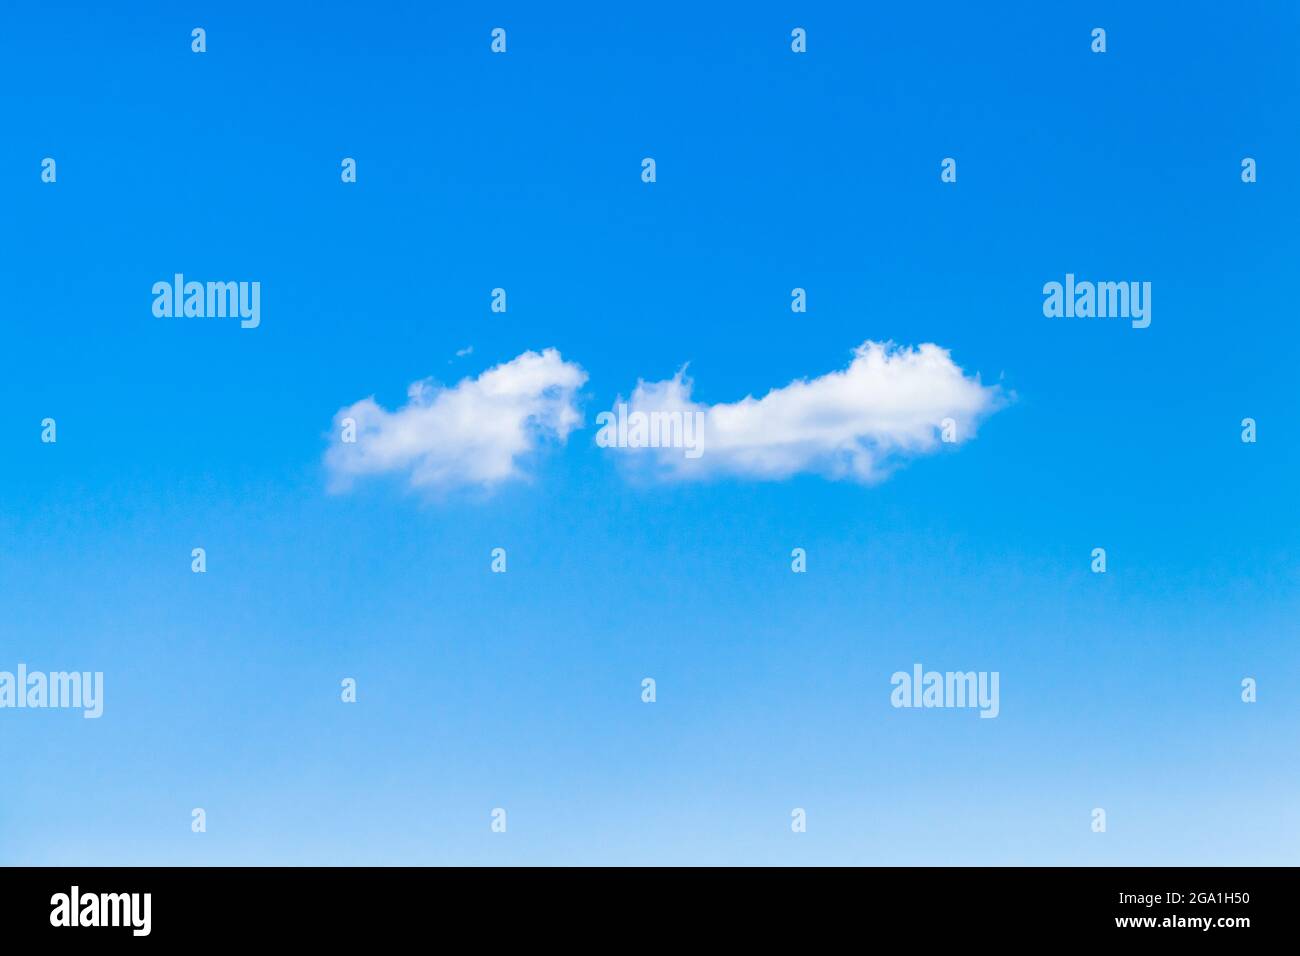 Two small white clouds fly in clear blue sky on a daytime, natural background photo Stock Photo